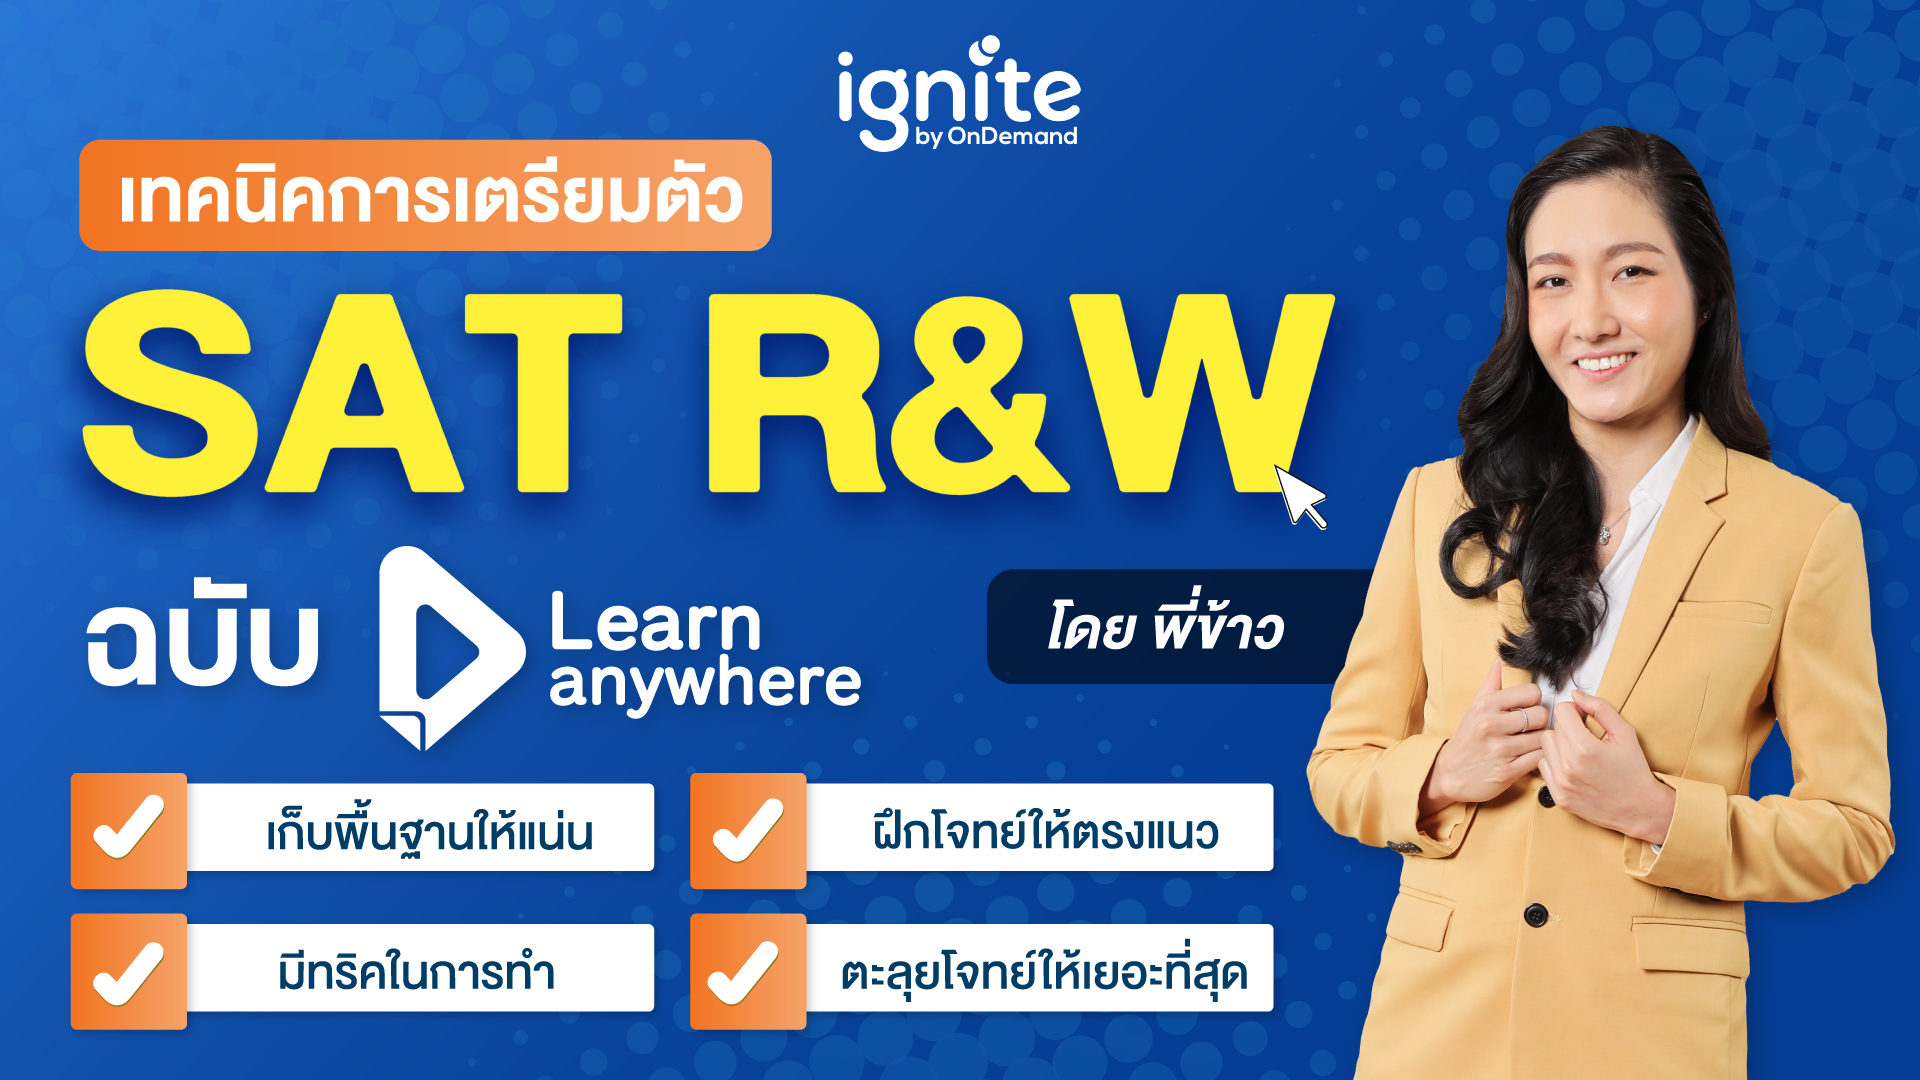 sat r&w by p kao ignite by ondemand